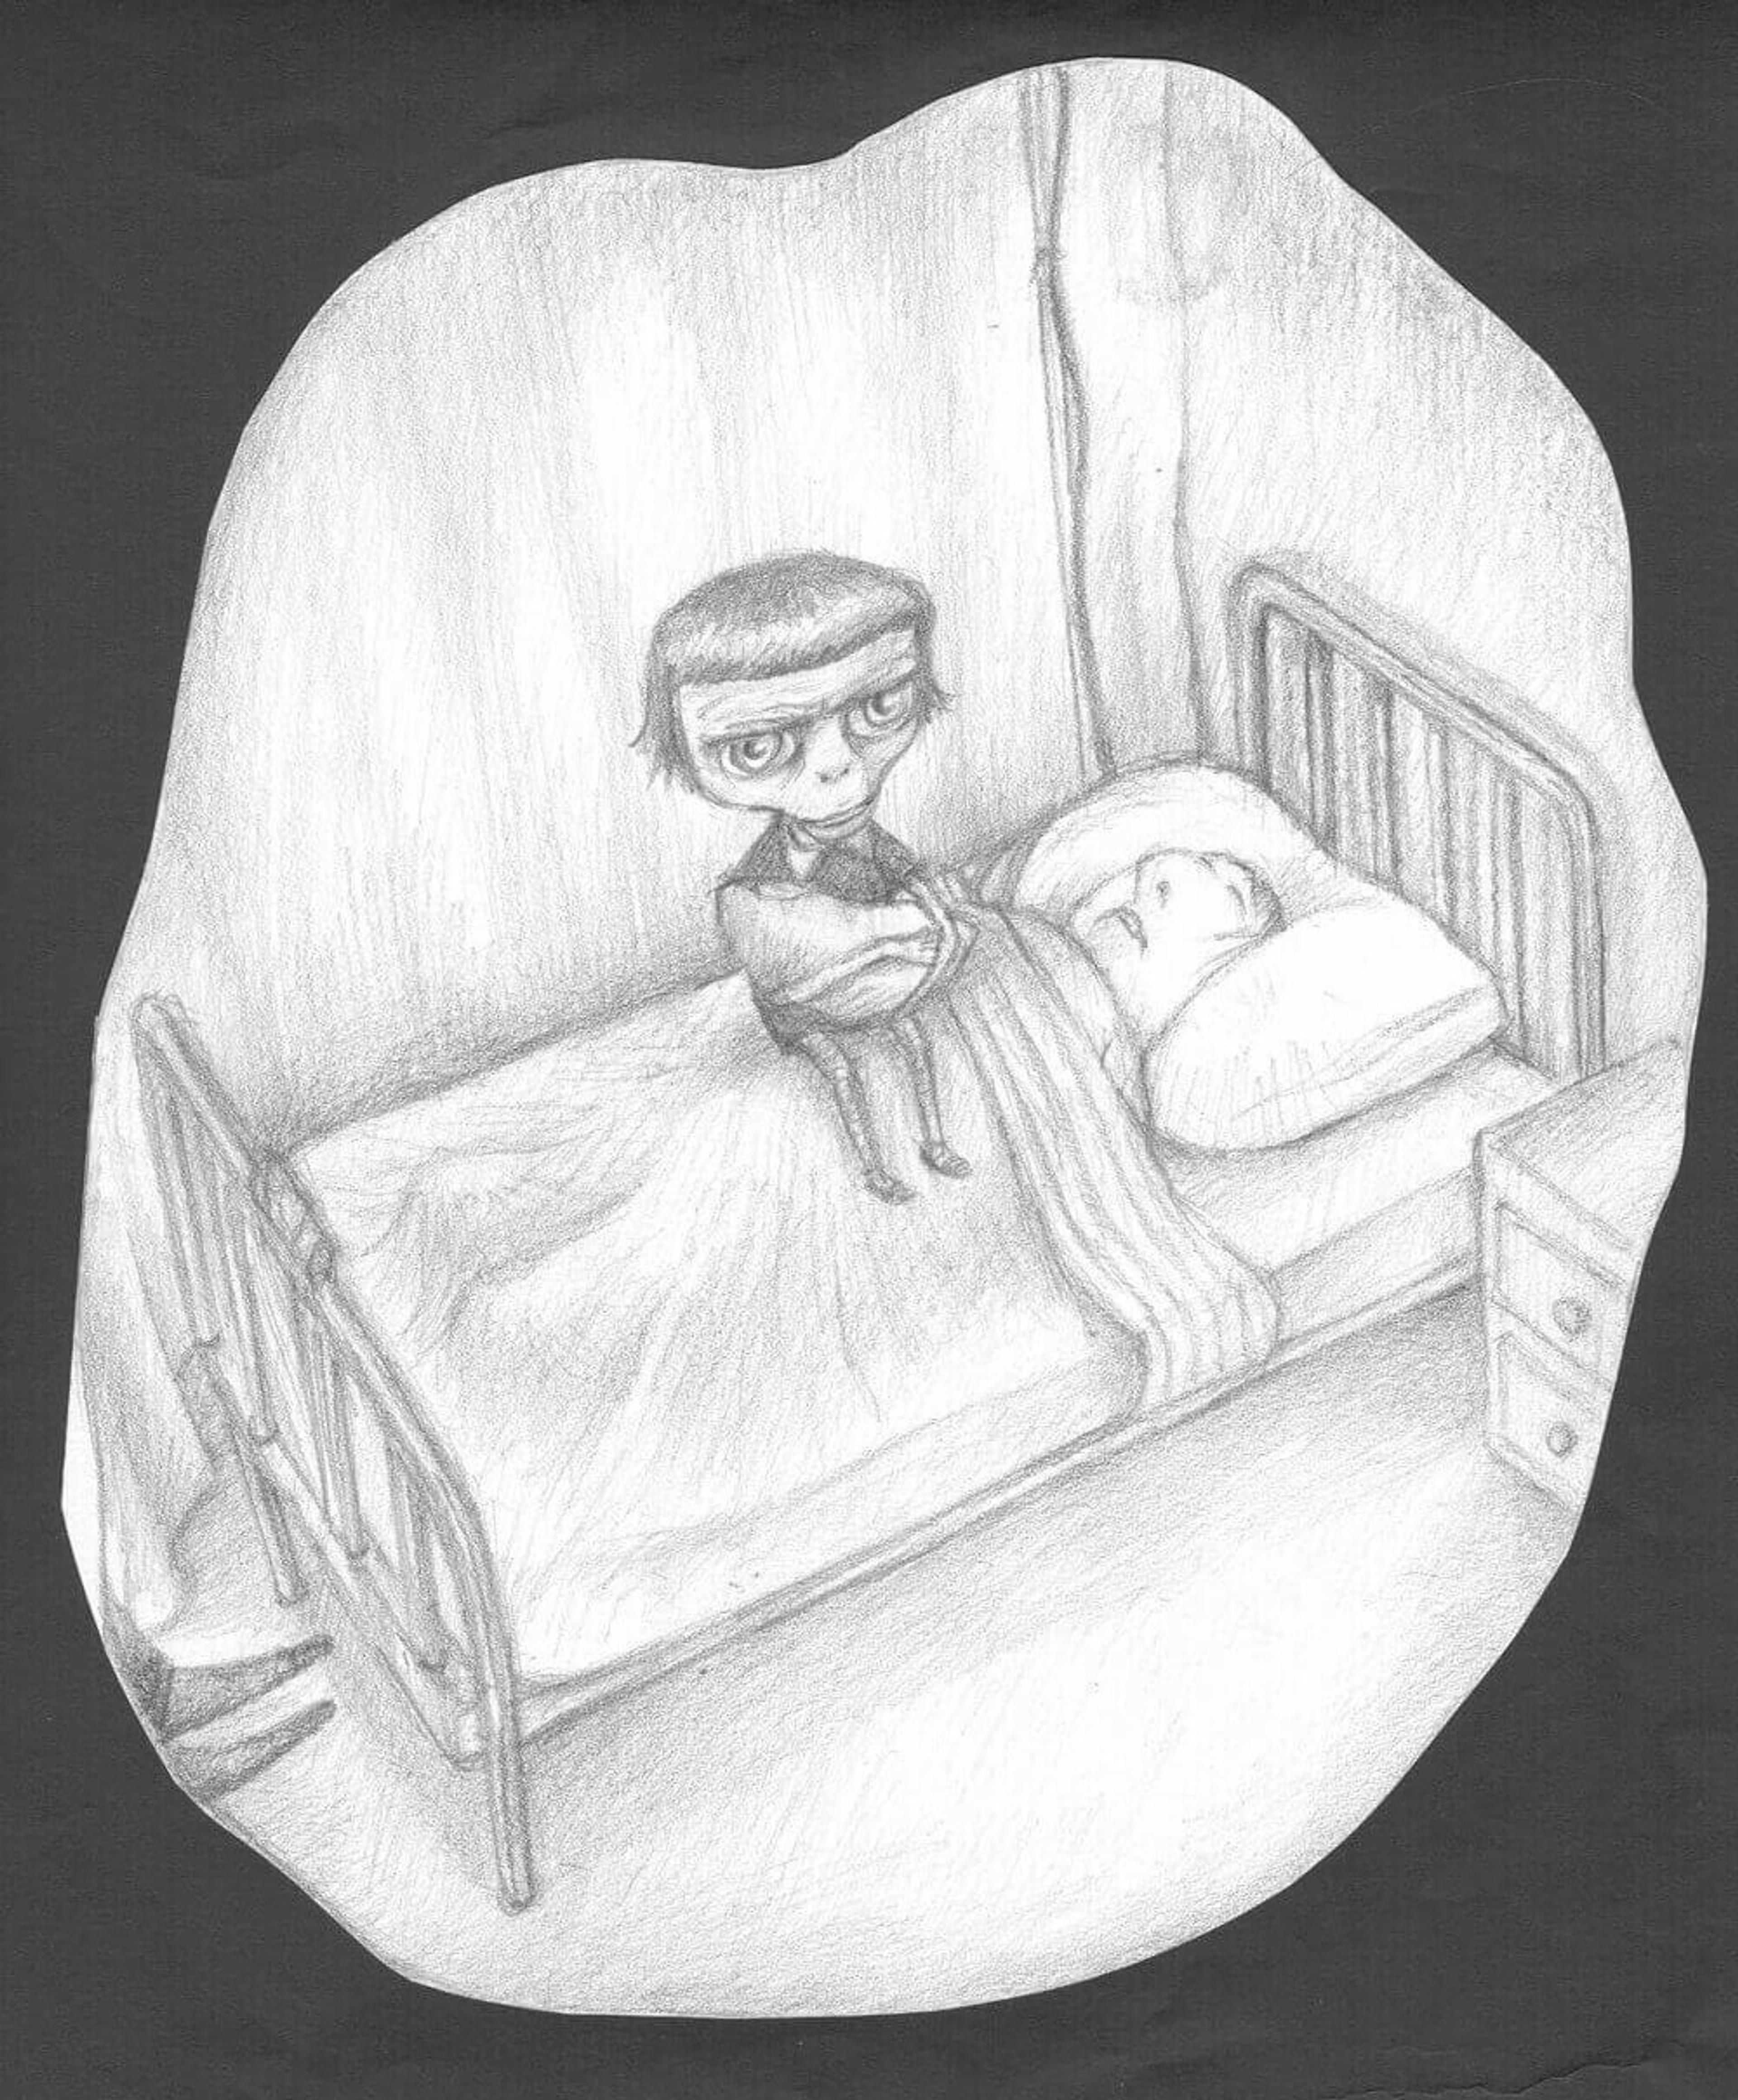 Illustration of a figure seated on a bed on top of someone lying down.